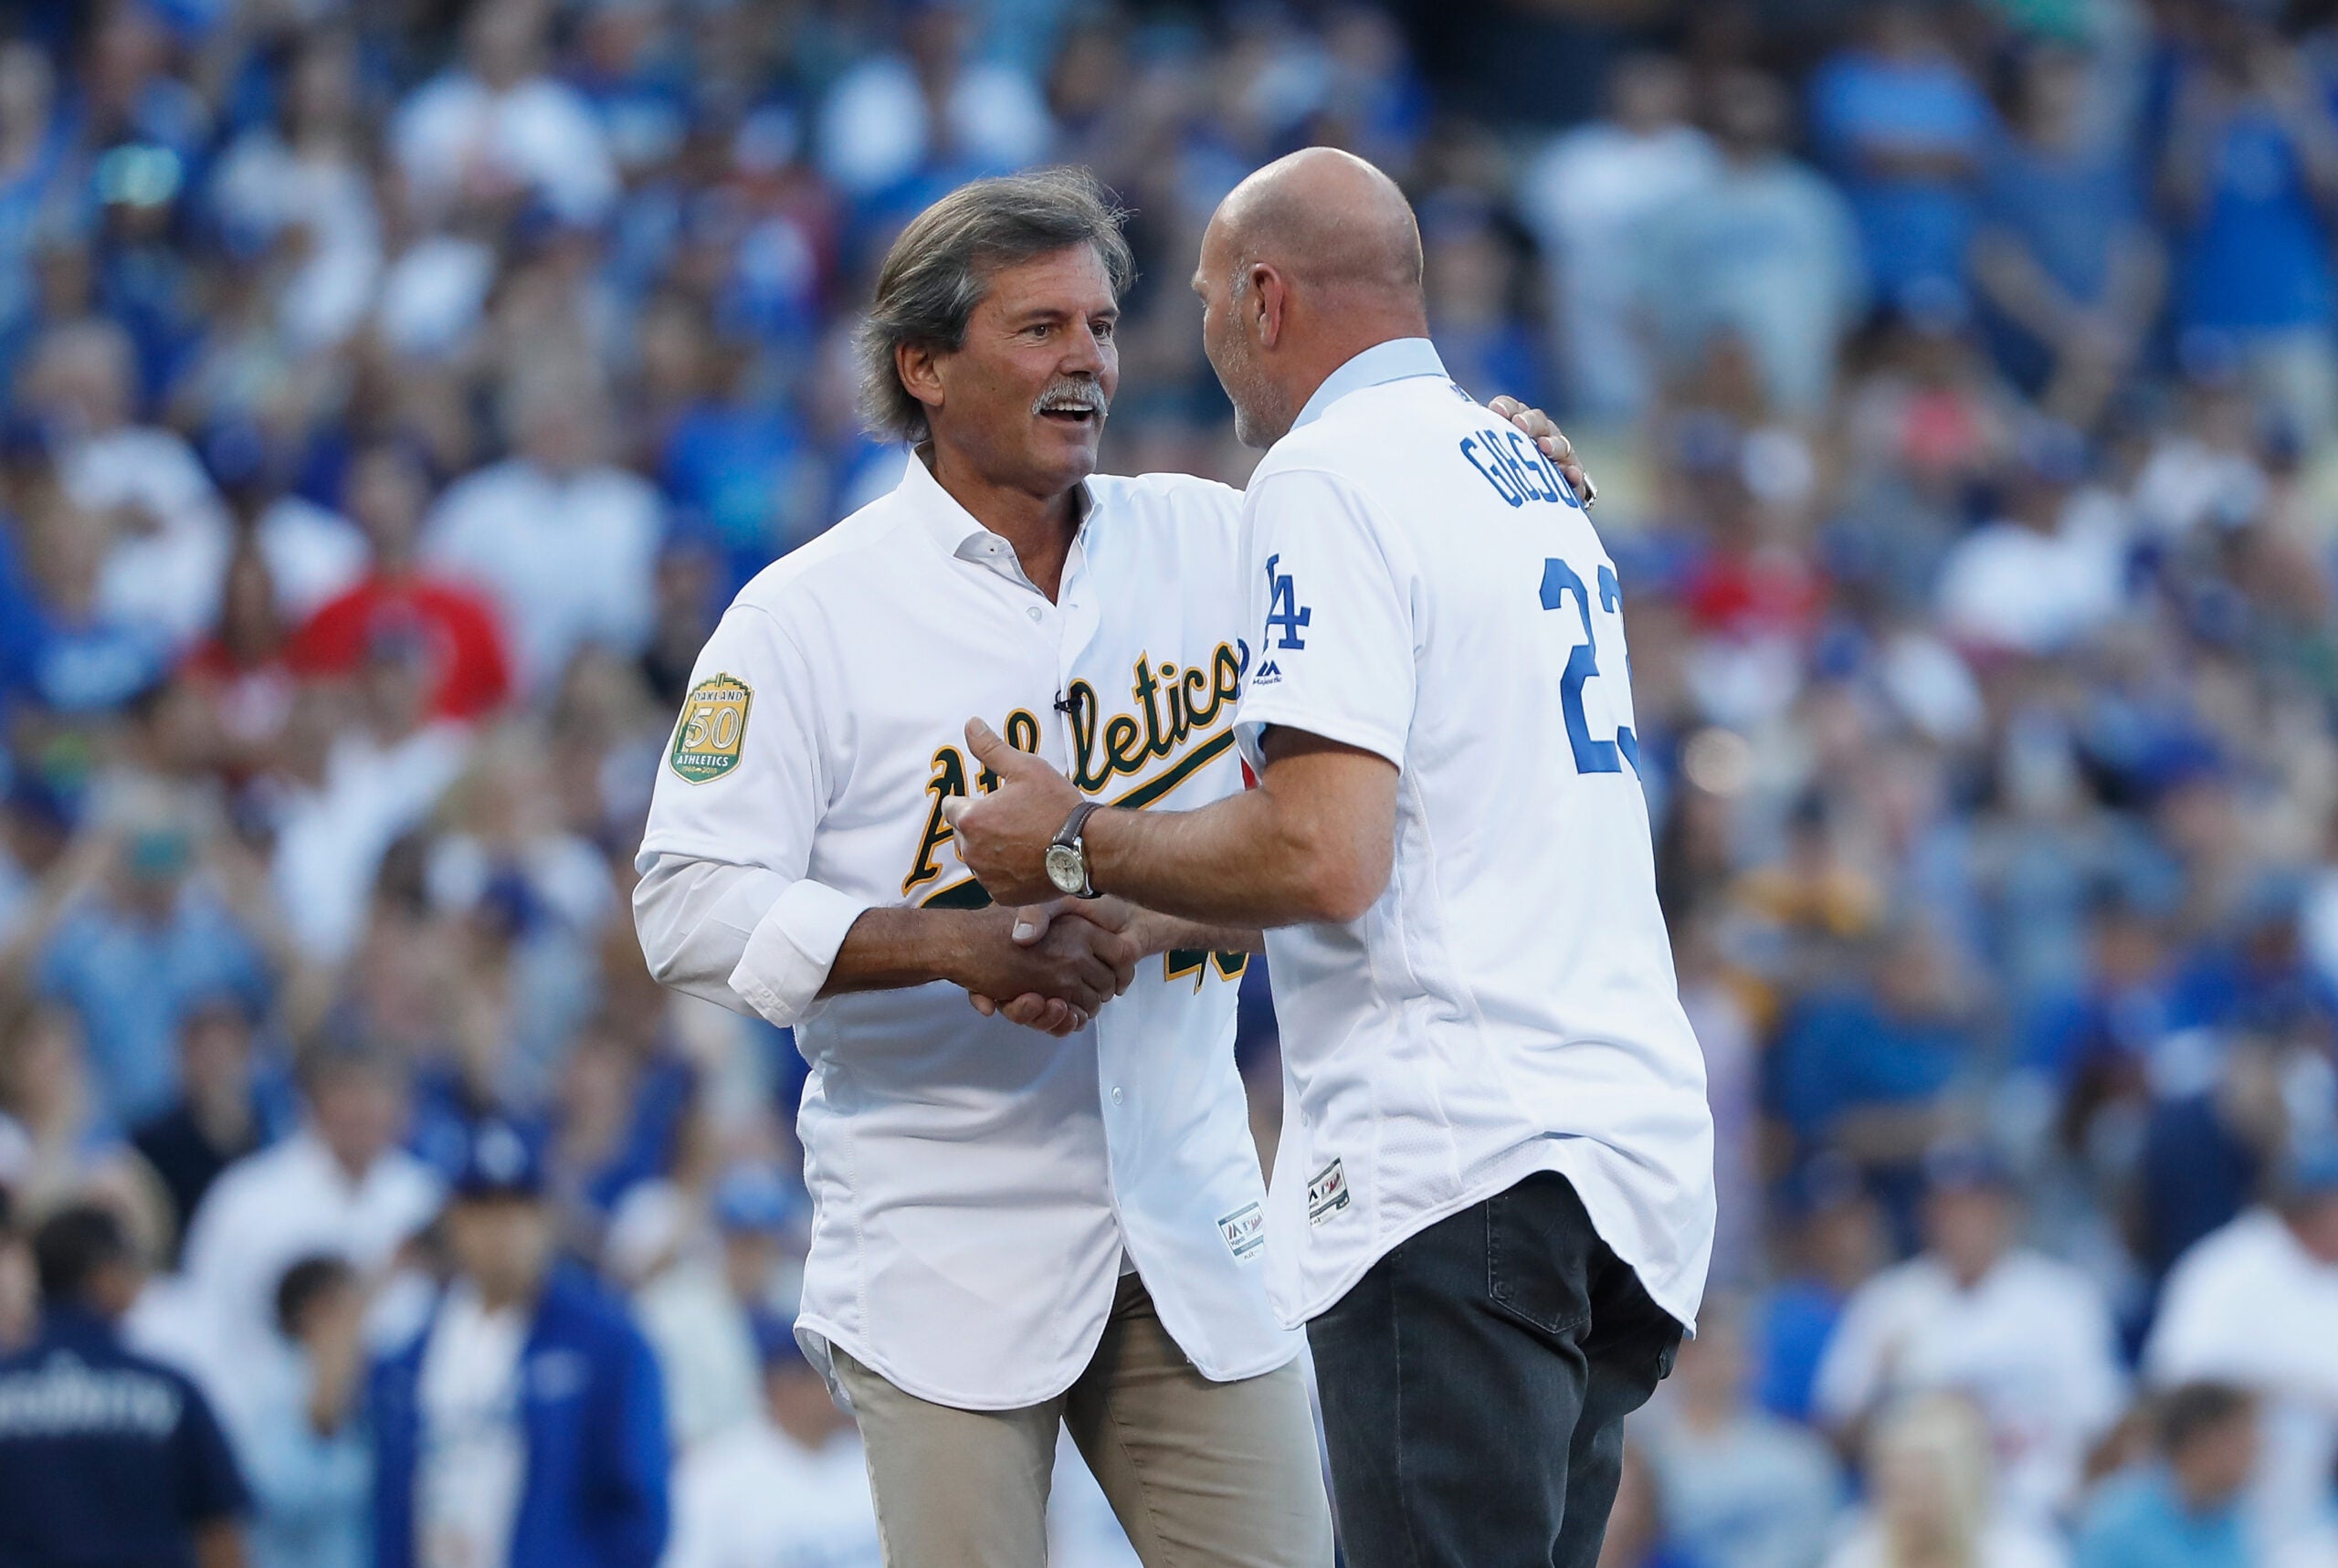 Dennis Eckersley threw out the first pitch to Kirk Gibson before